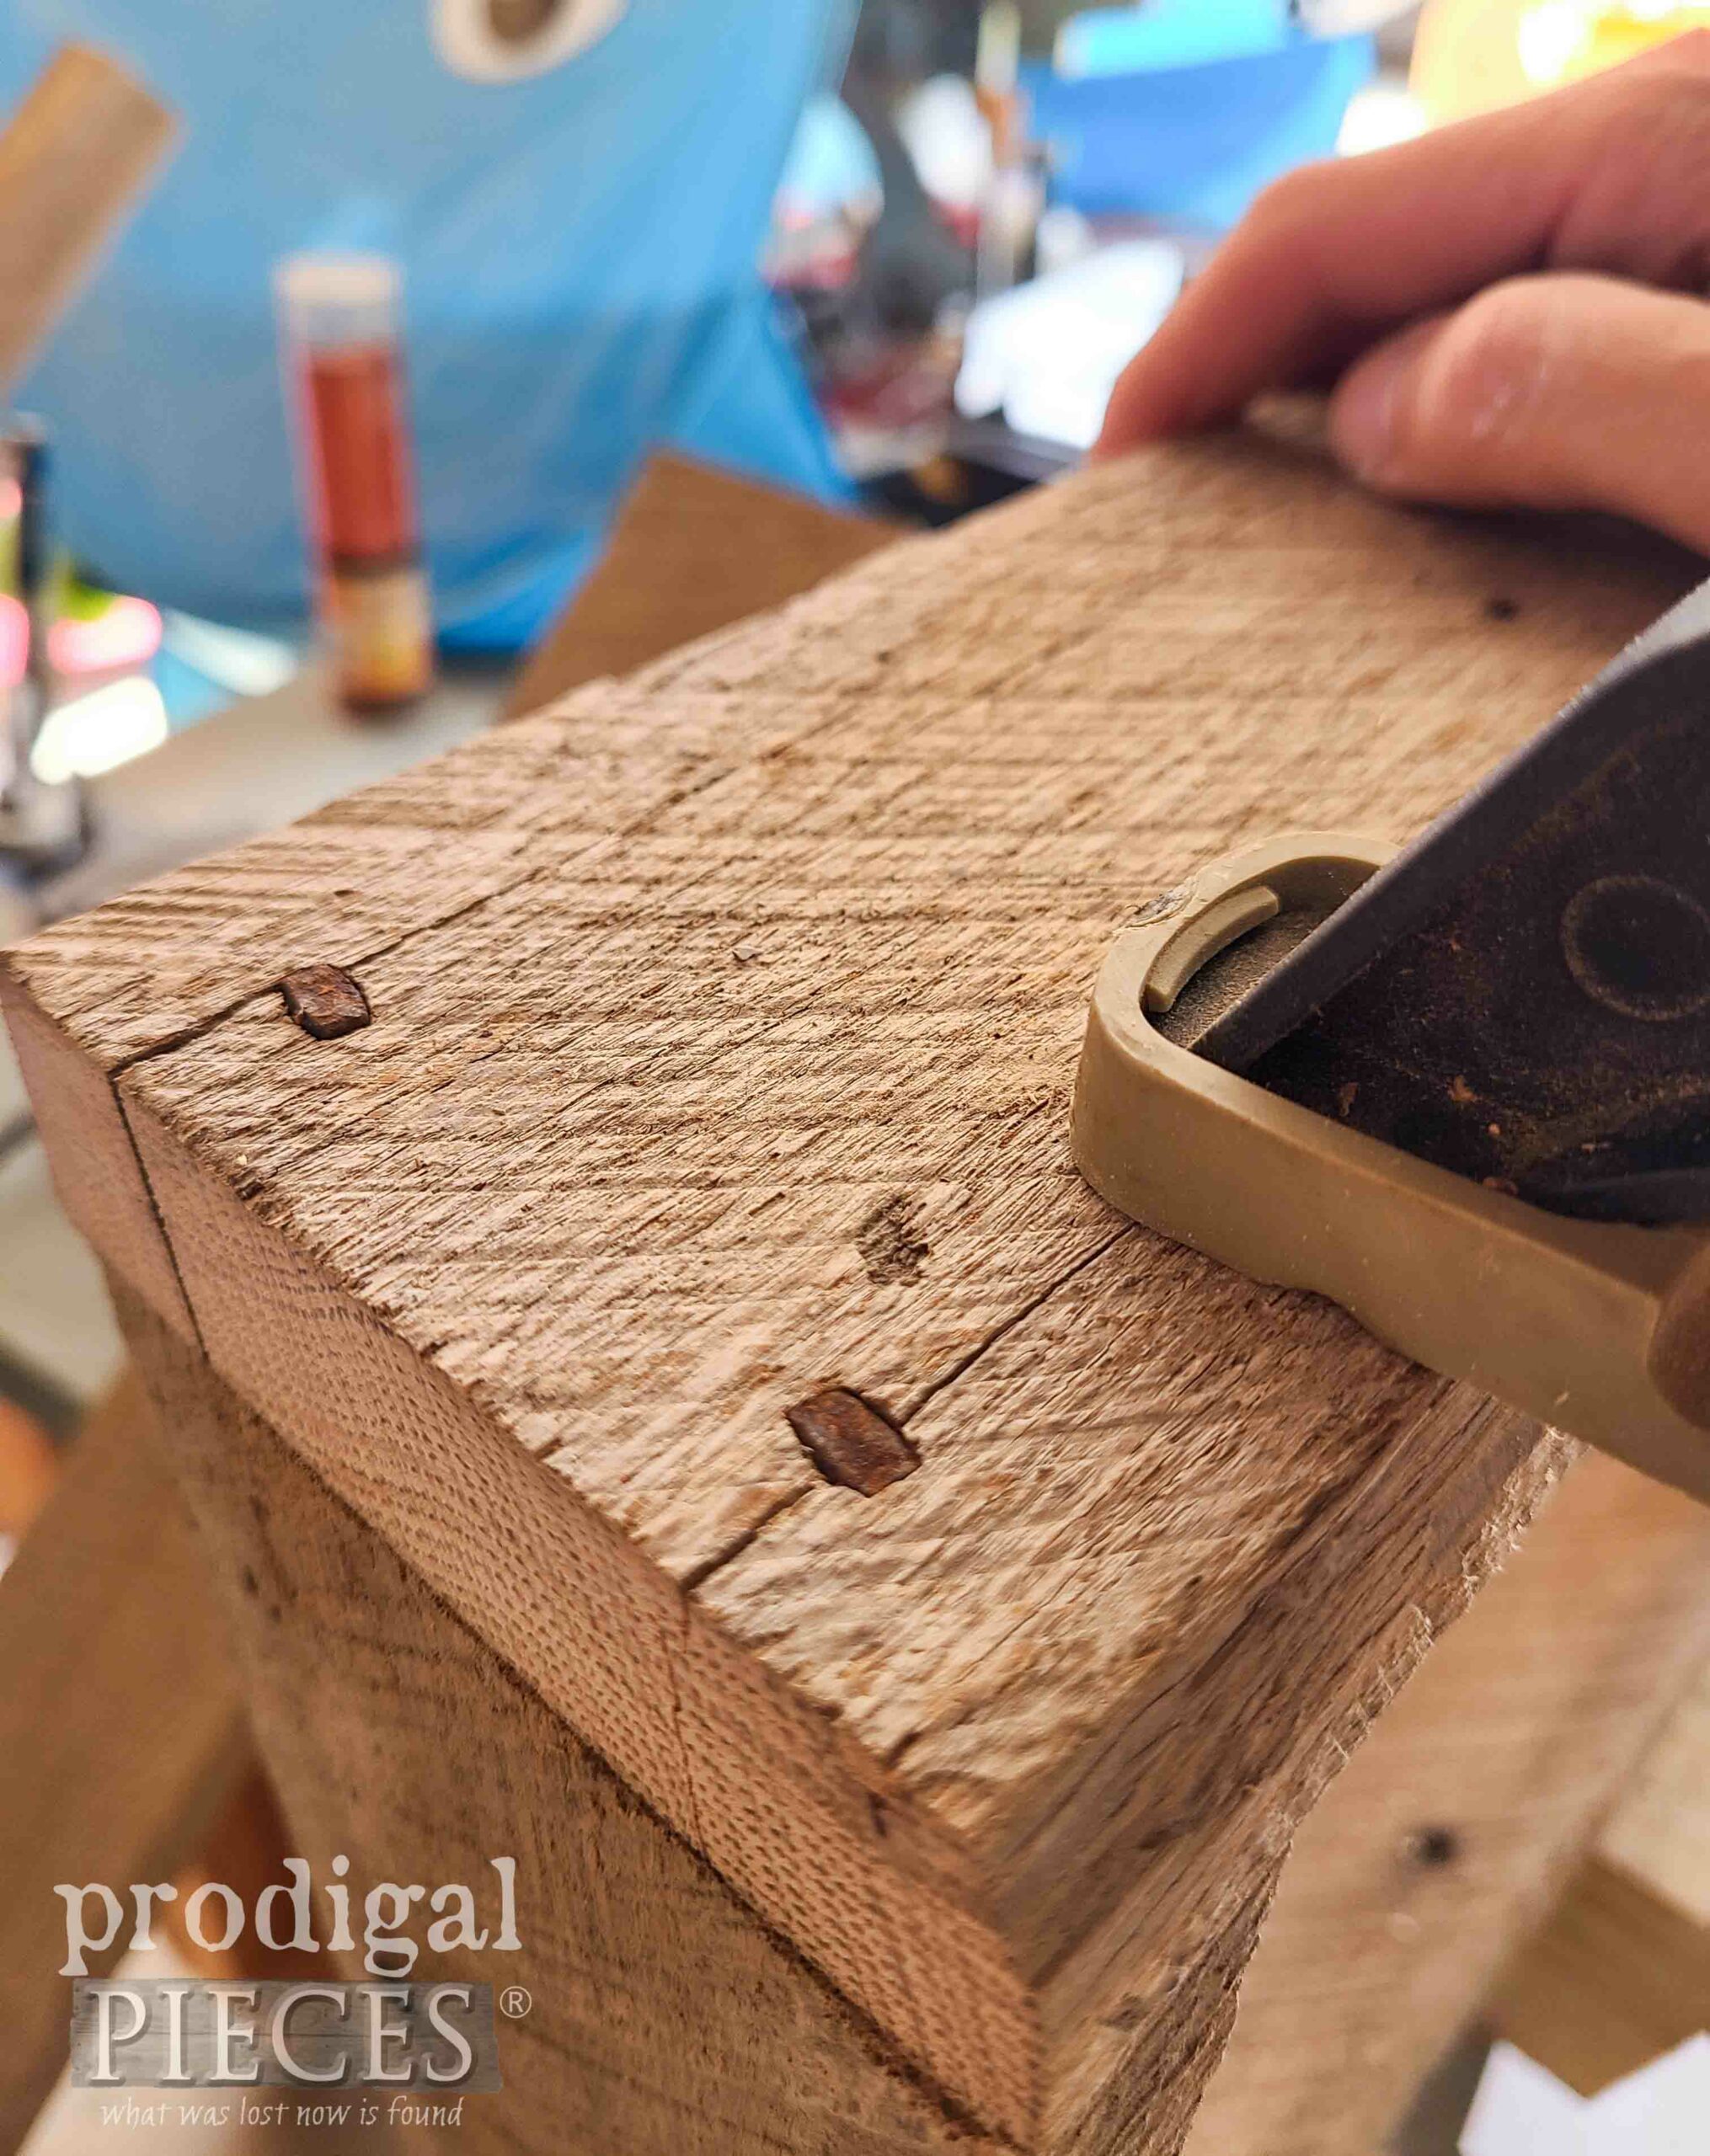 Square Masonry Nails Rusted for DIY Reclaimed Wood Tote | prodigalpieces.com #prodigalpieces